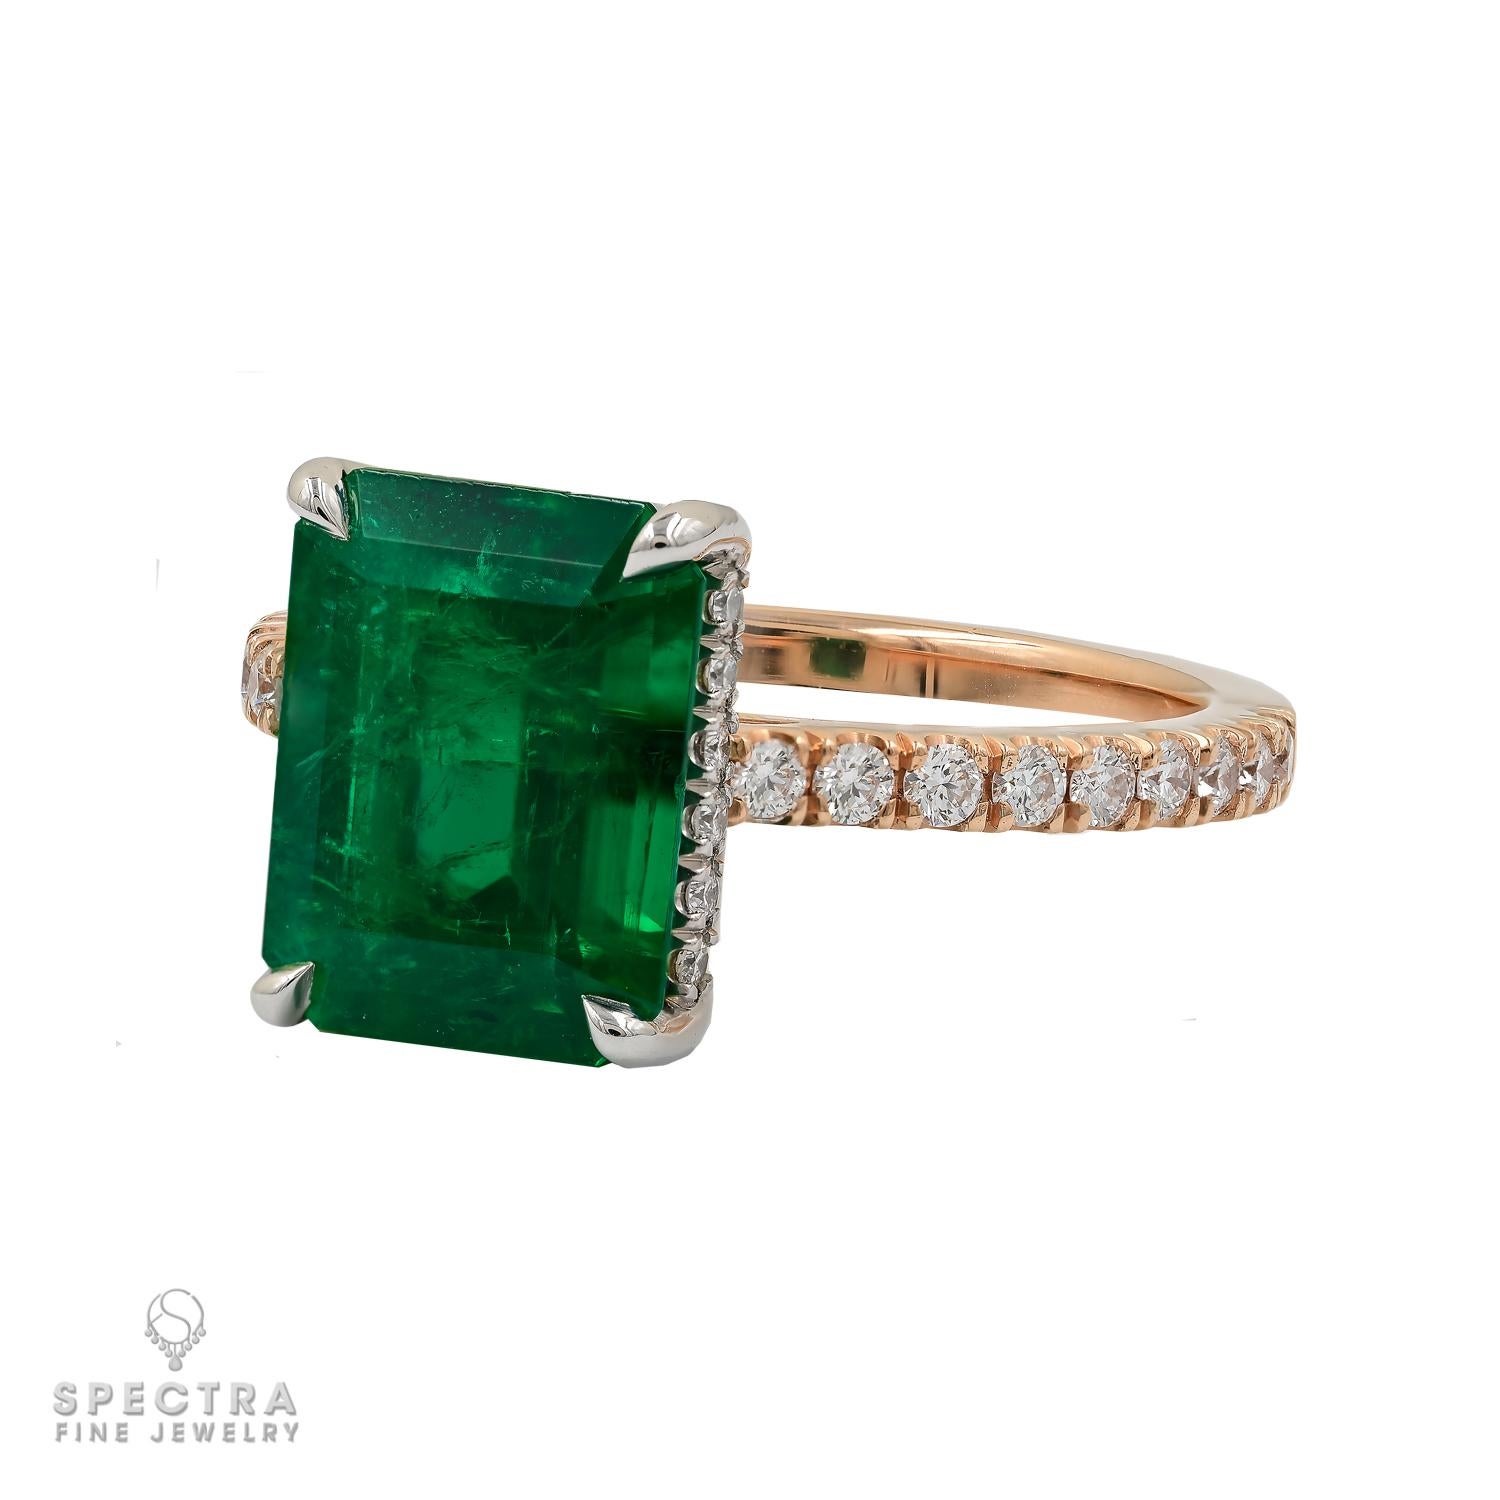 Presenting the Himalayan Emerald Diamond Ring, a breathtaking piece that transcends occasions, perfect as both a cocktail and engagement ring. 
At its heart lies a captivating 3.22-carat emerald-cut Himalayan Emerald, certified by GRS to be of